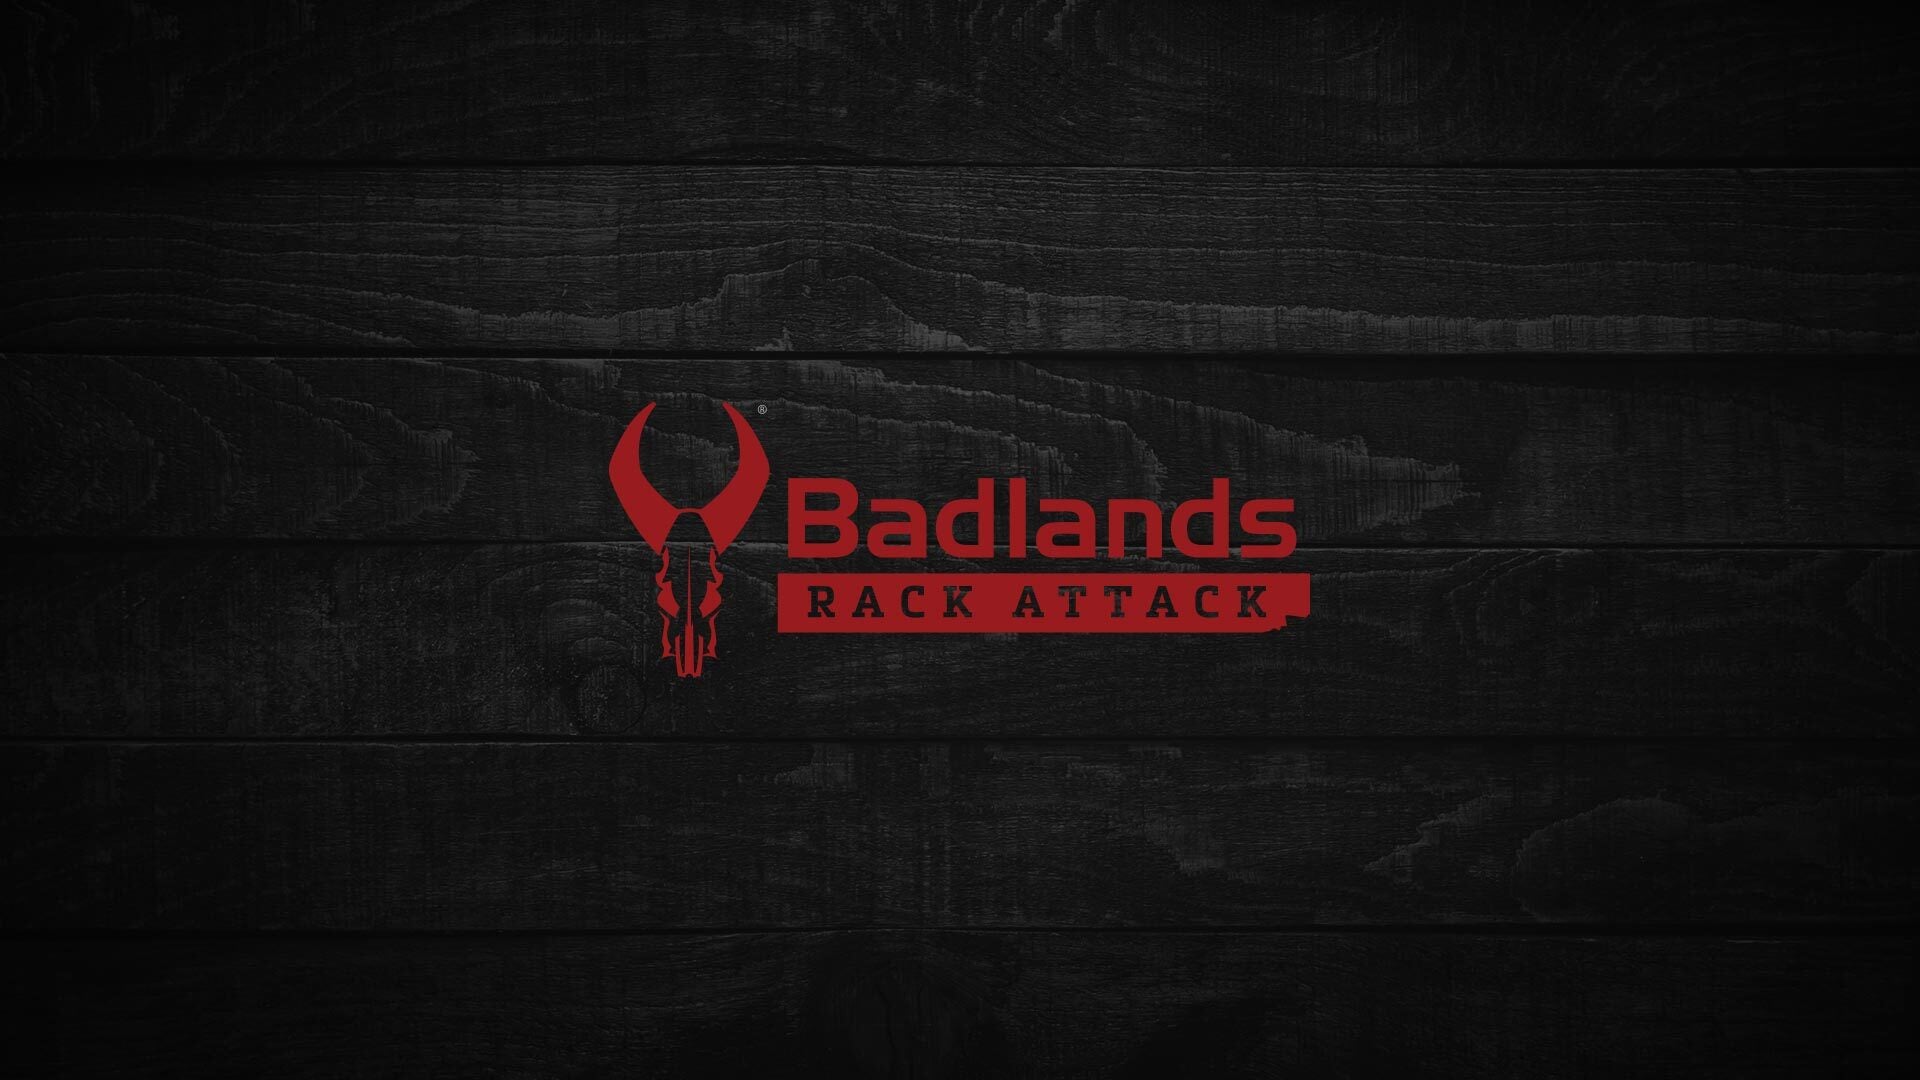 Badlands Rack Attack Season 3 Episode 6: Between Two Racks - An Inside Look at Working in the Hunting Industry